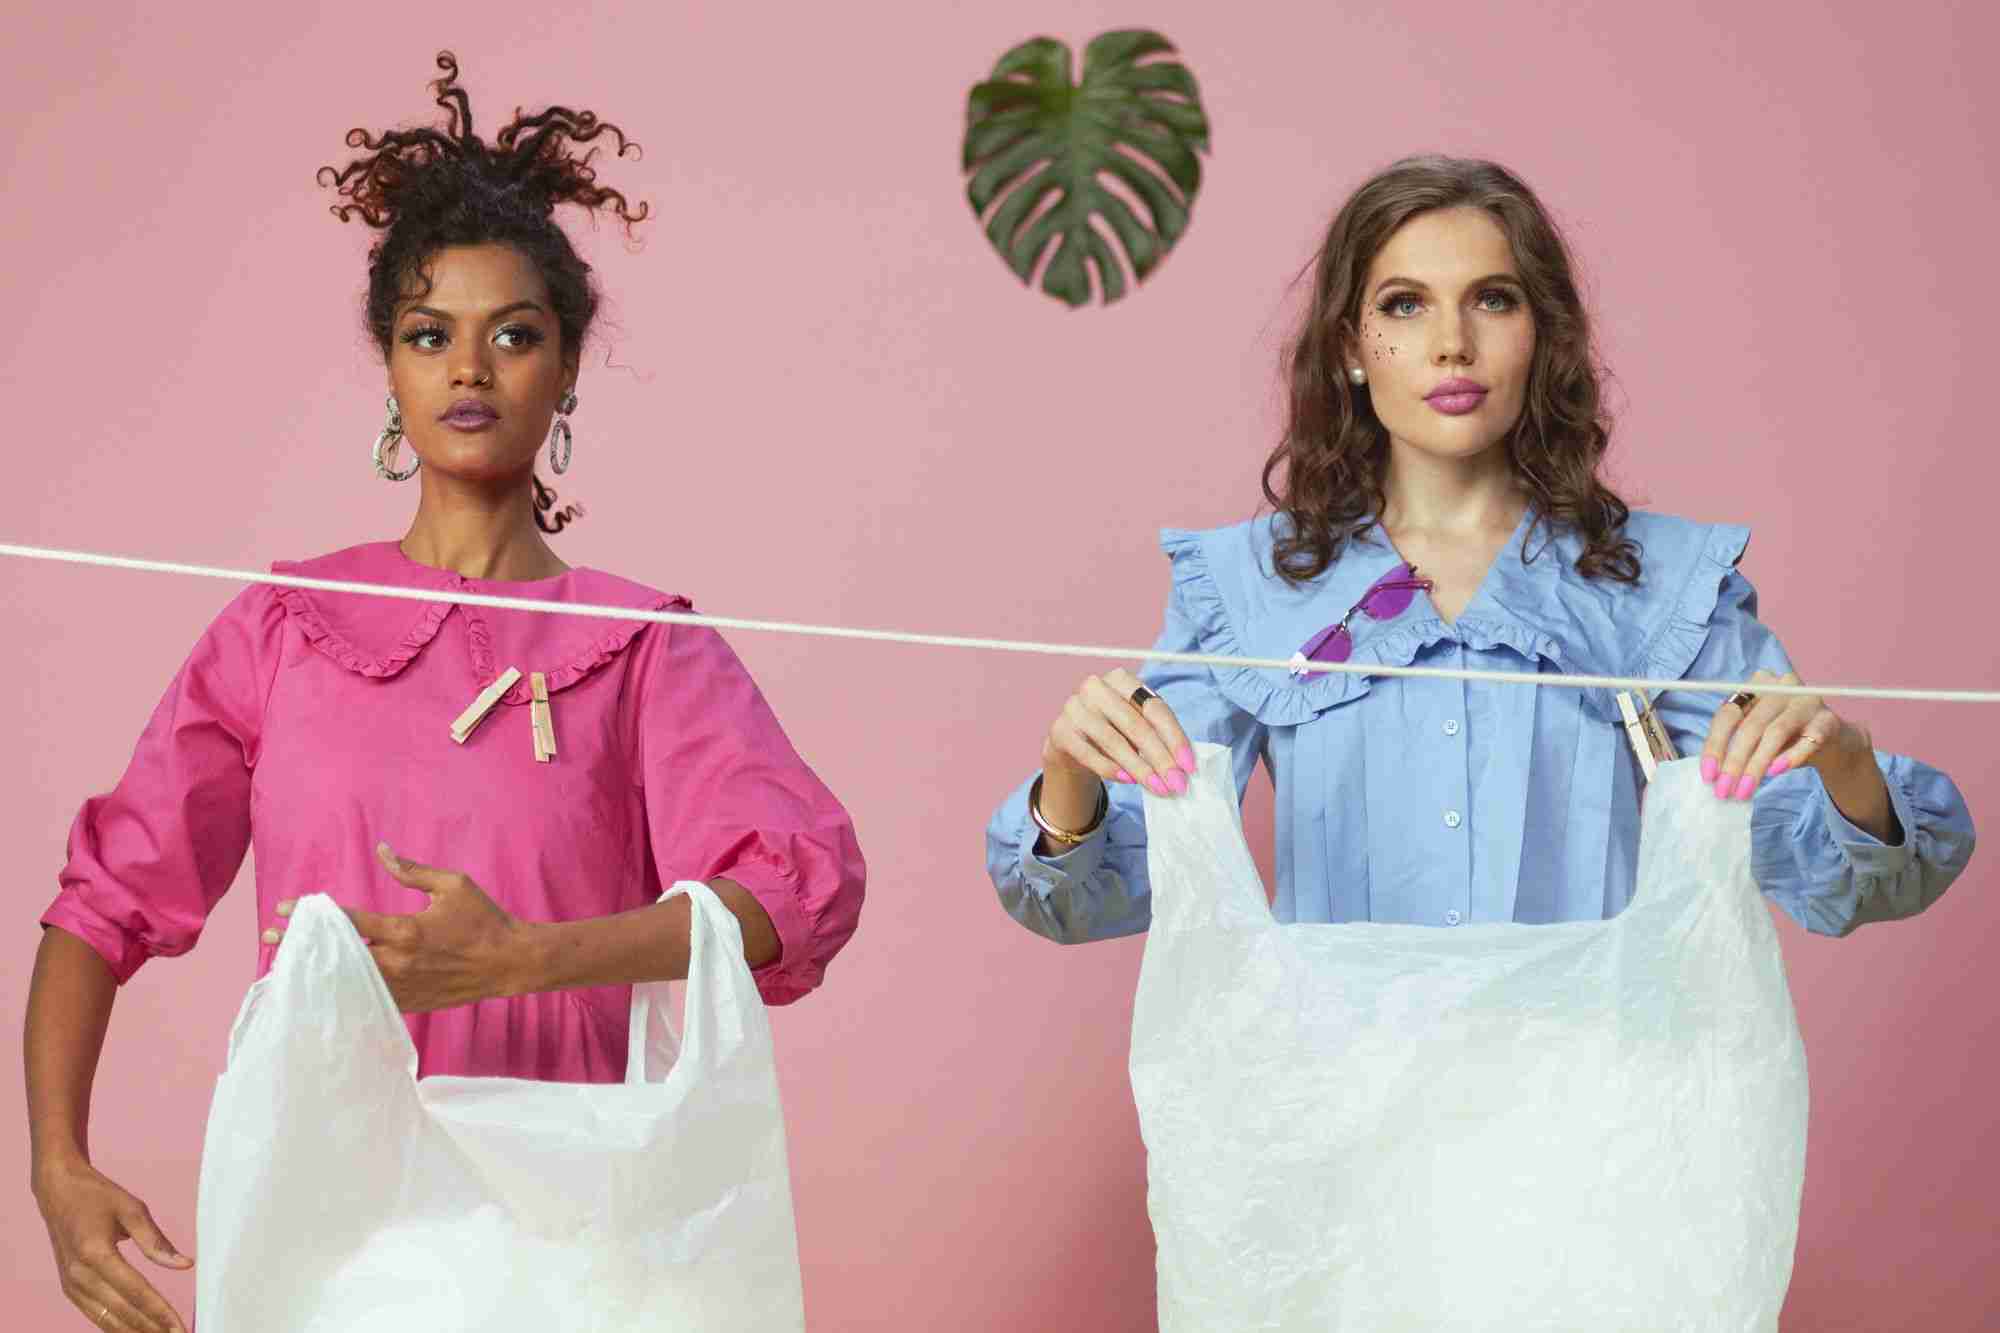 two women holding shopping bags in front of a pink wall.